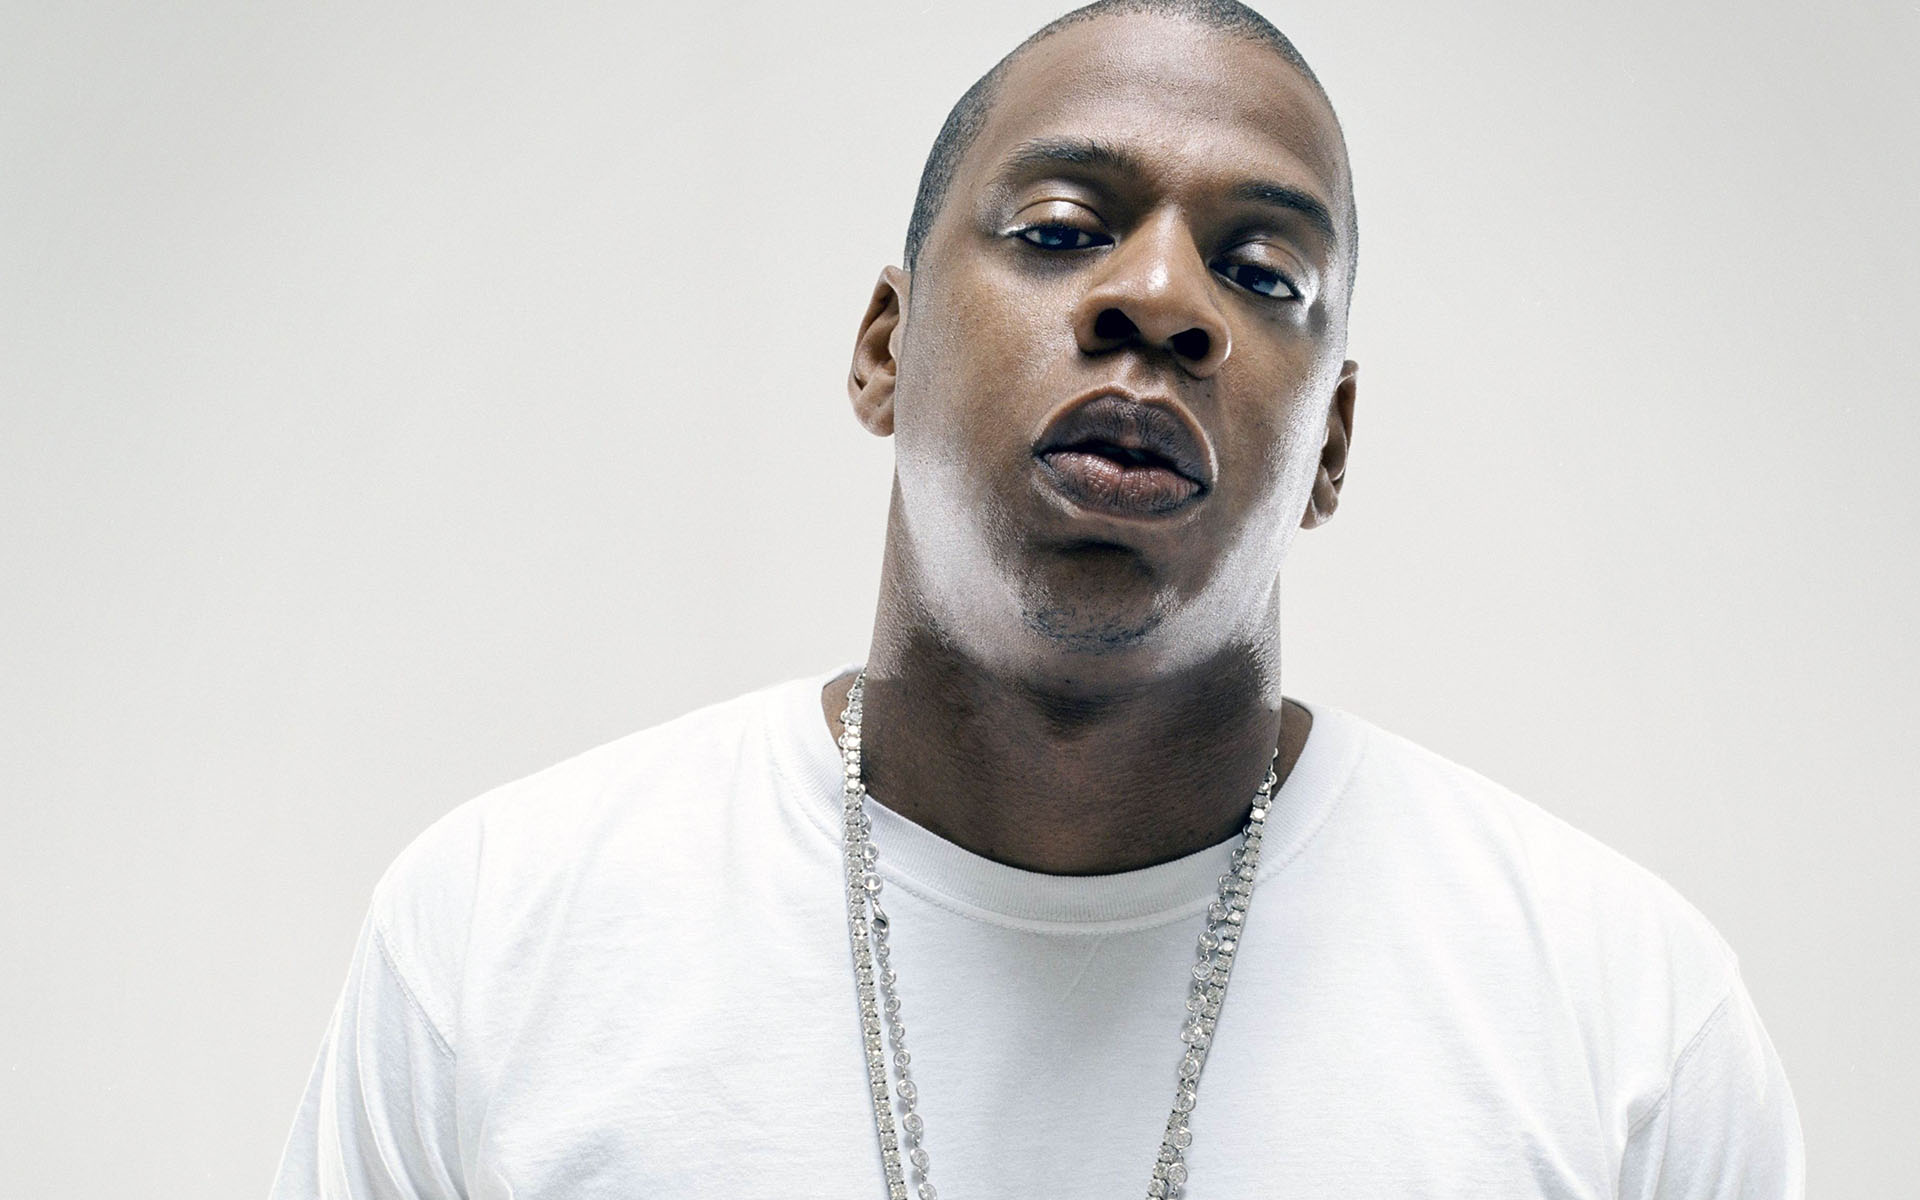 http://lanyvocal.com/wp-content/uploads/2014/03/jay-z-with-chain.jpg